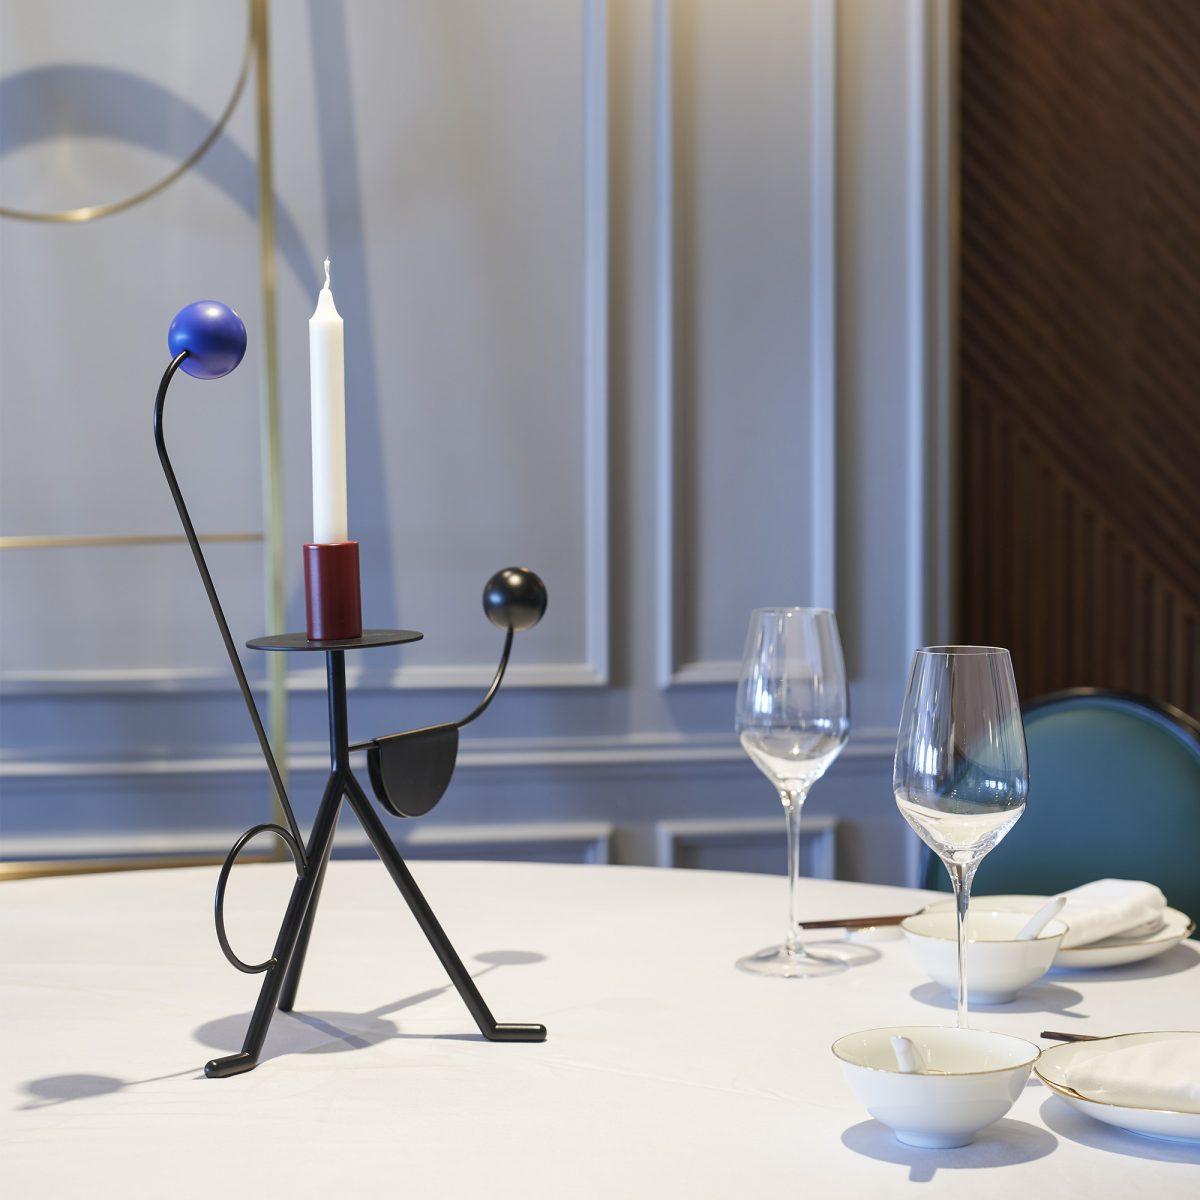 Powder-Coated Les Immobiles N°4 Candleholder by Thomas Dariel For Sale